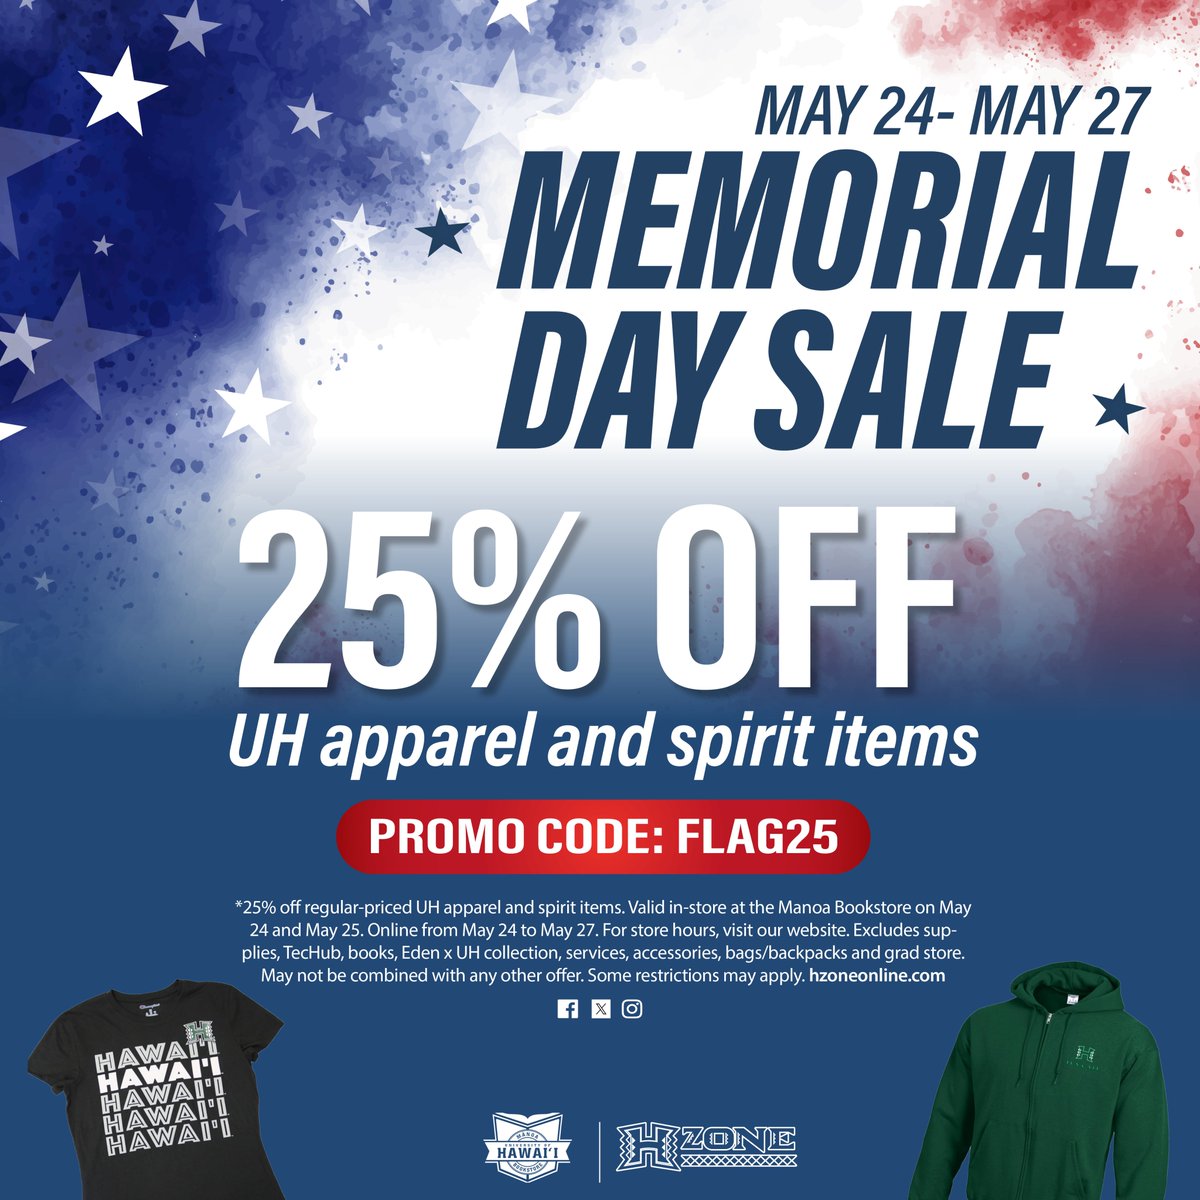 Get ready for the long weekend with a special Memorial Day Sale starting today! Enjoy 25% OFF UH apparel and spirit items. Use promo code: FLAG25